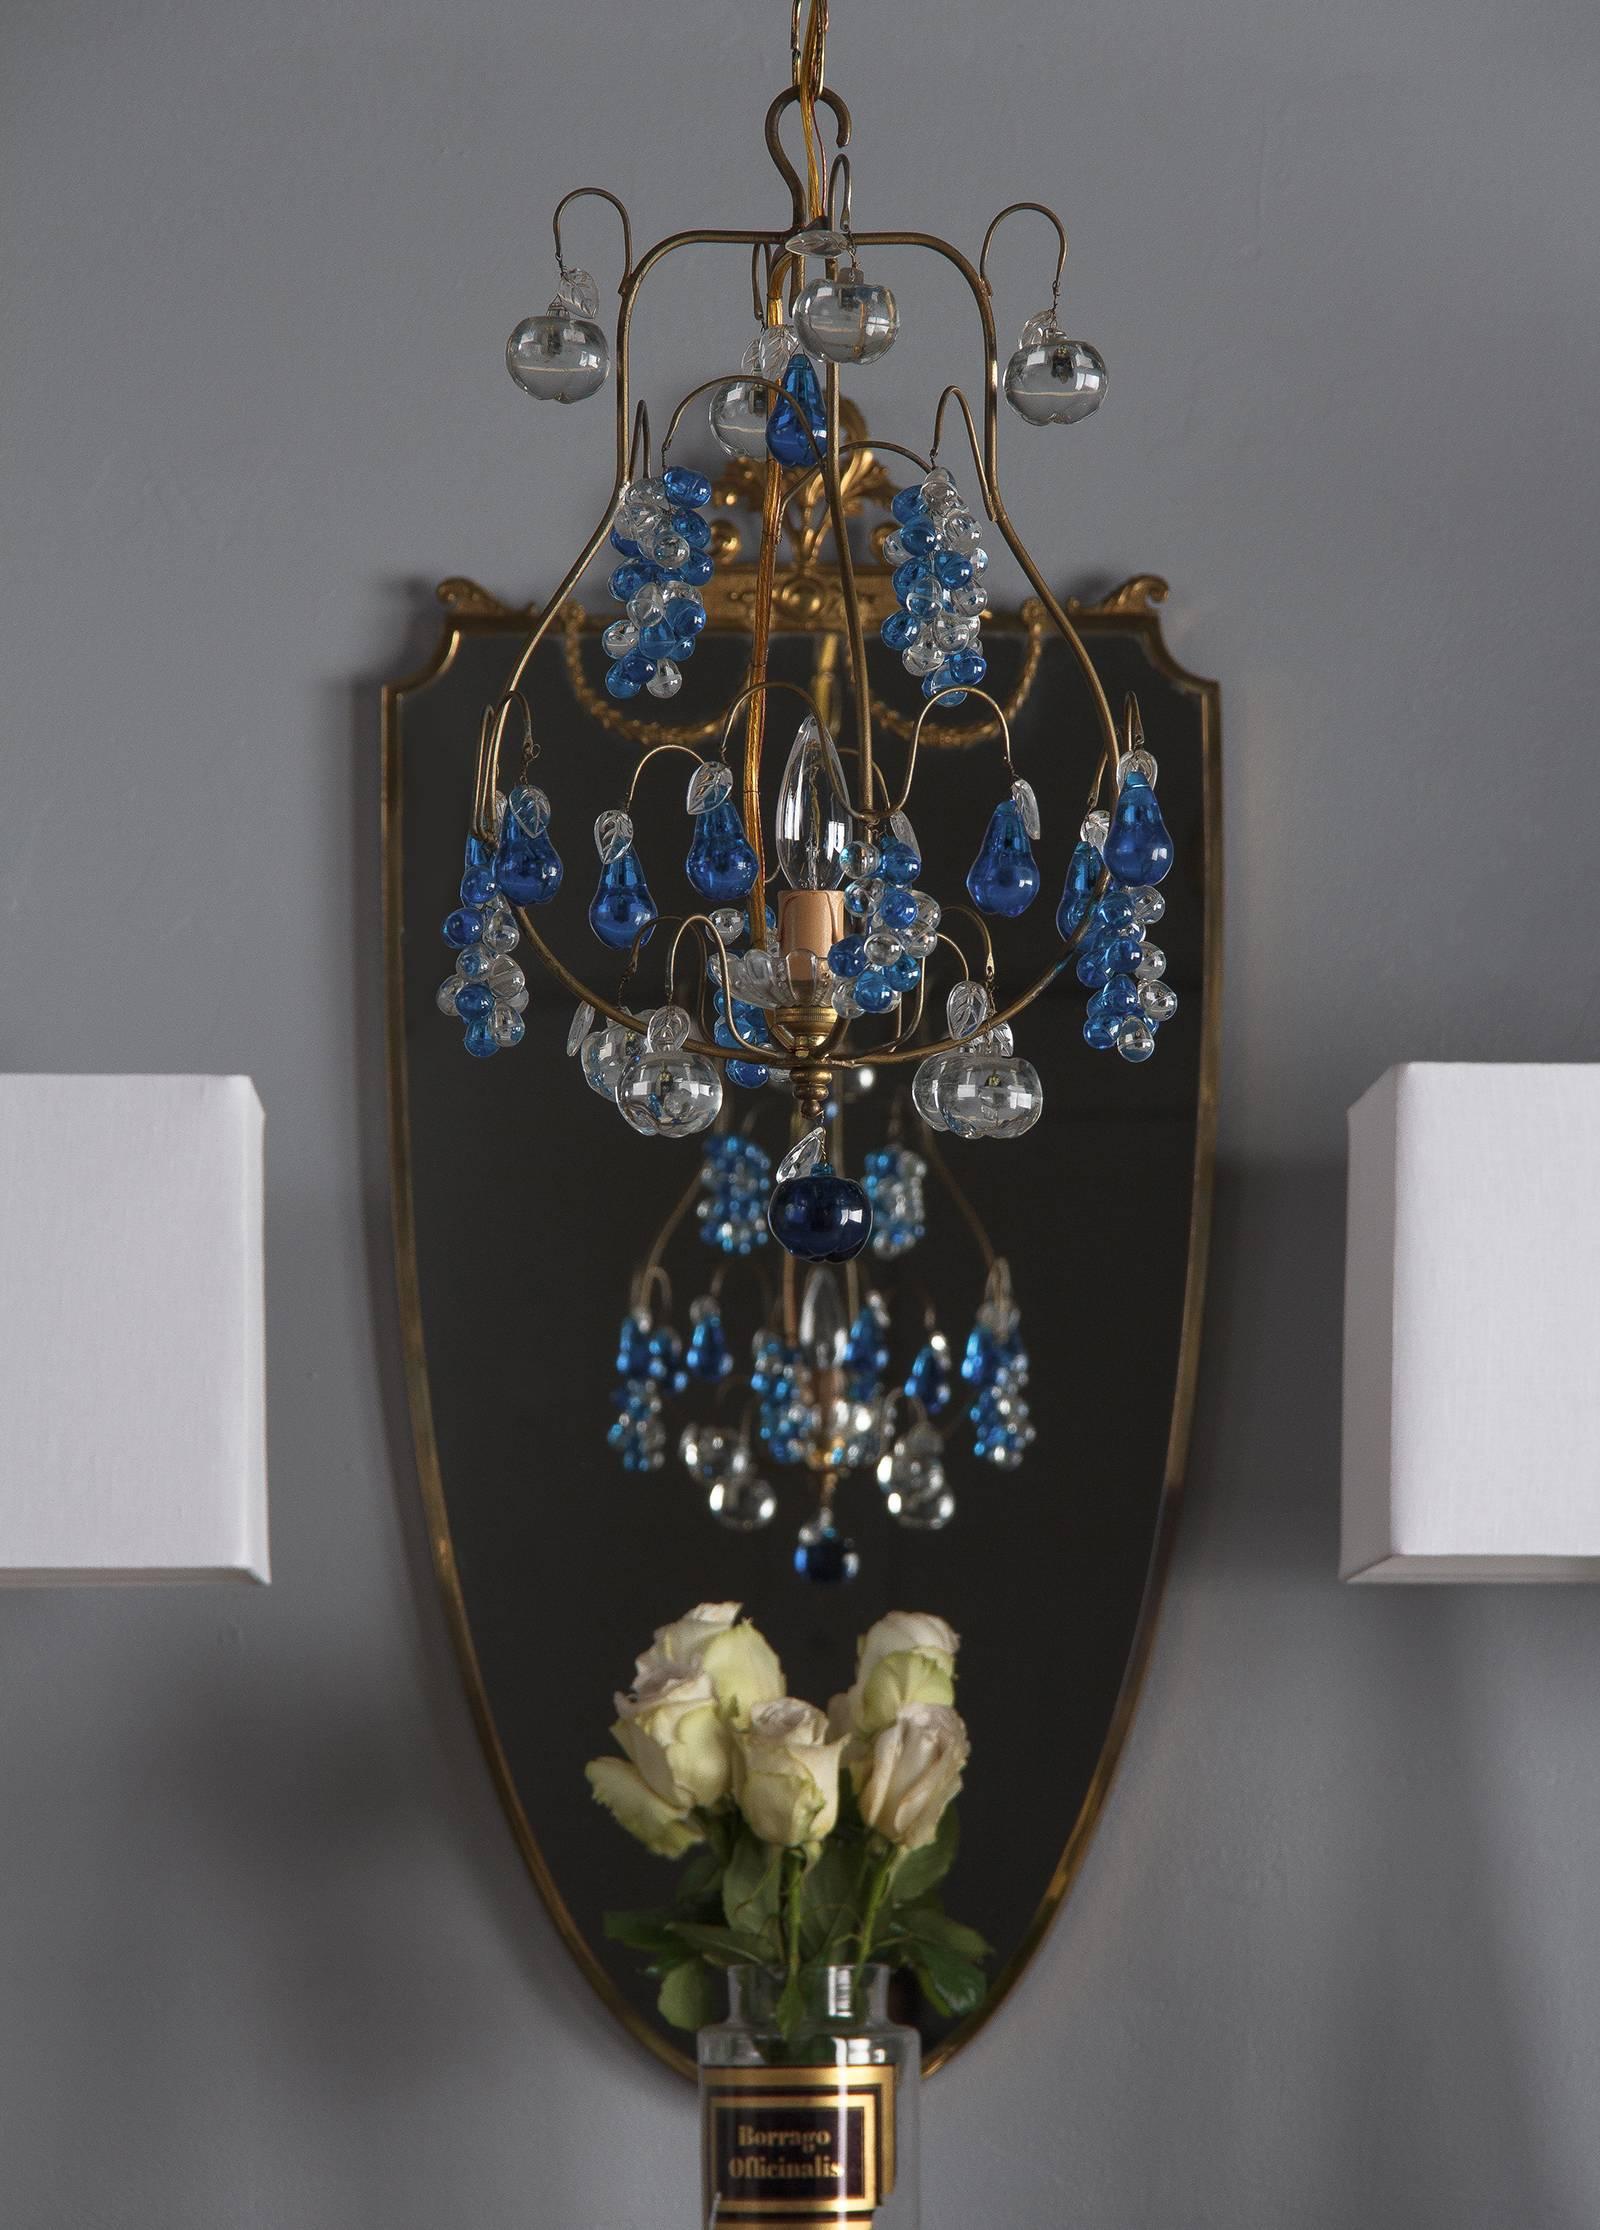 A charming Mid-Century Murano chandelier made of brass with cobalt blue and clear glass pendants in the shape of fruits (grapes, apples and pears). The fixture takes one single small socket light bulb up to 60 w. Measure: The adjustable chain and